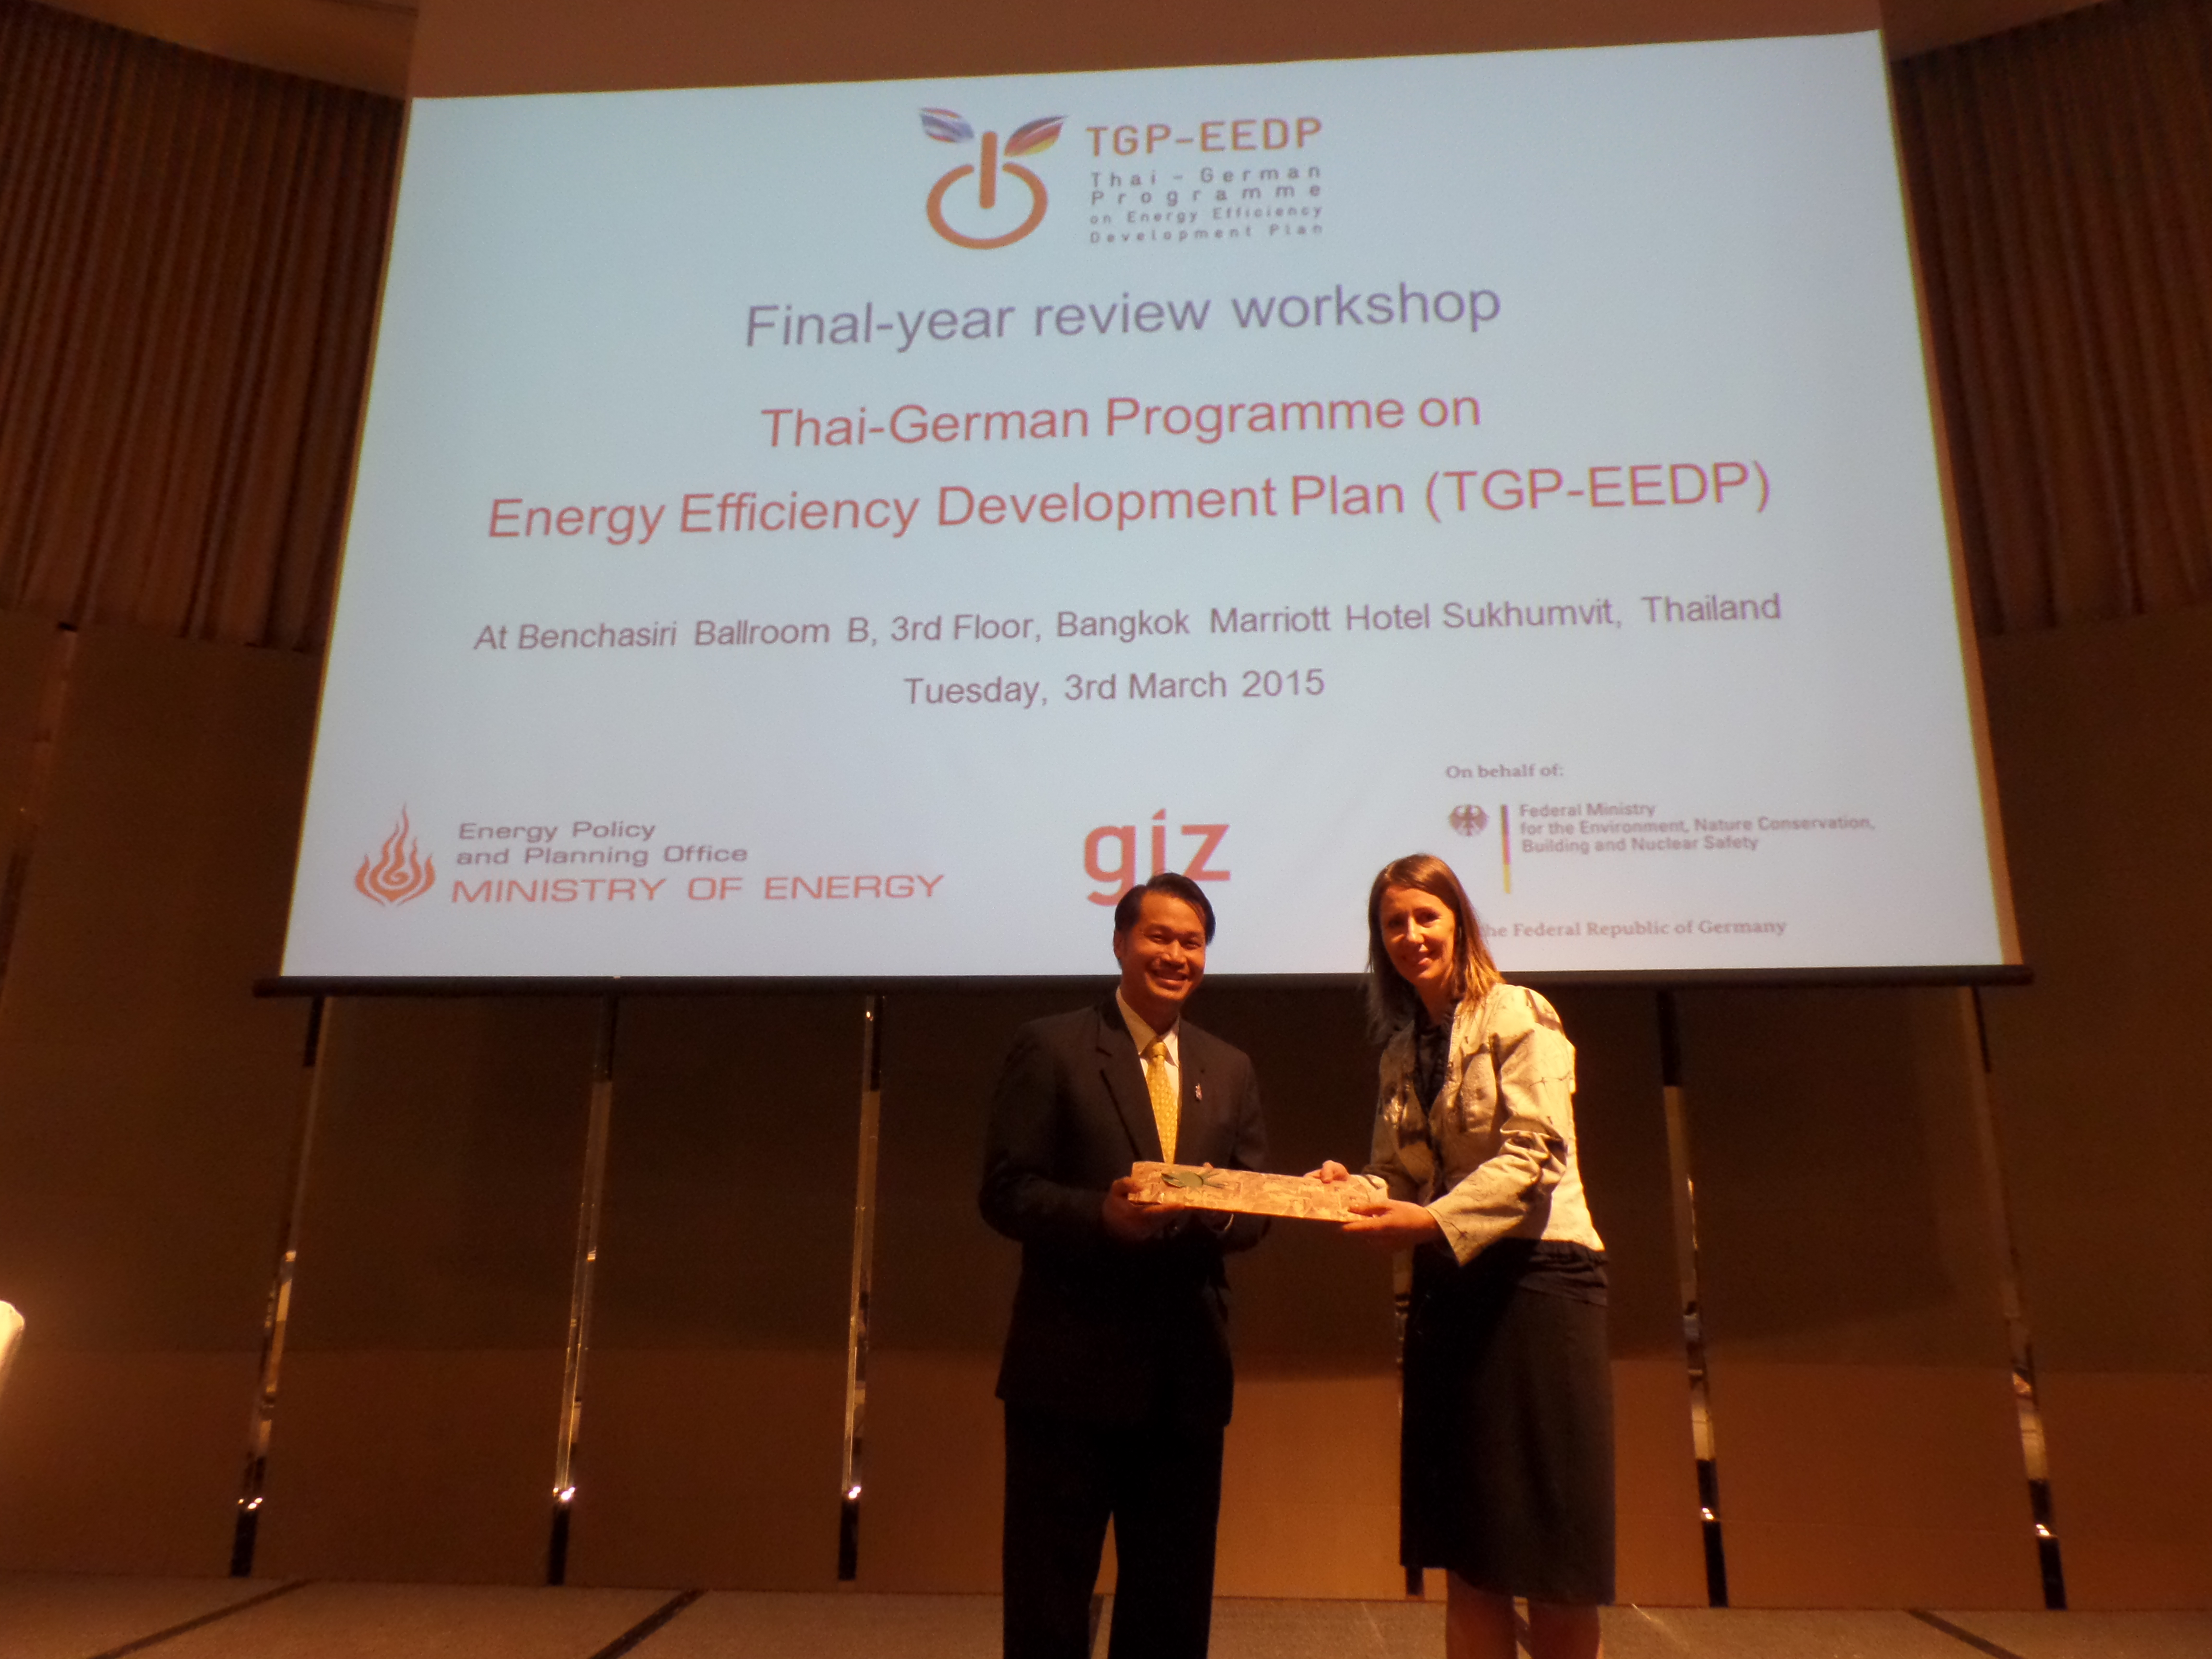 Final-Year Review Workshop of TGP-EEDP Project